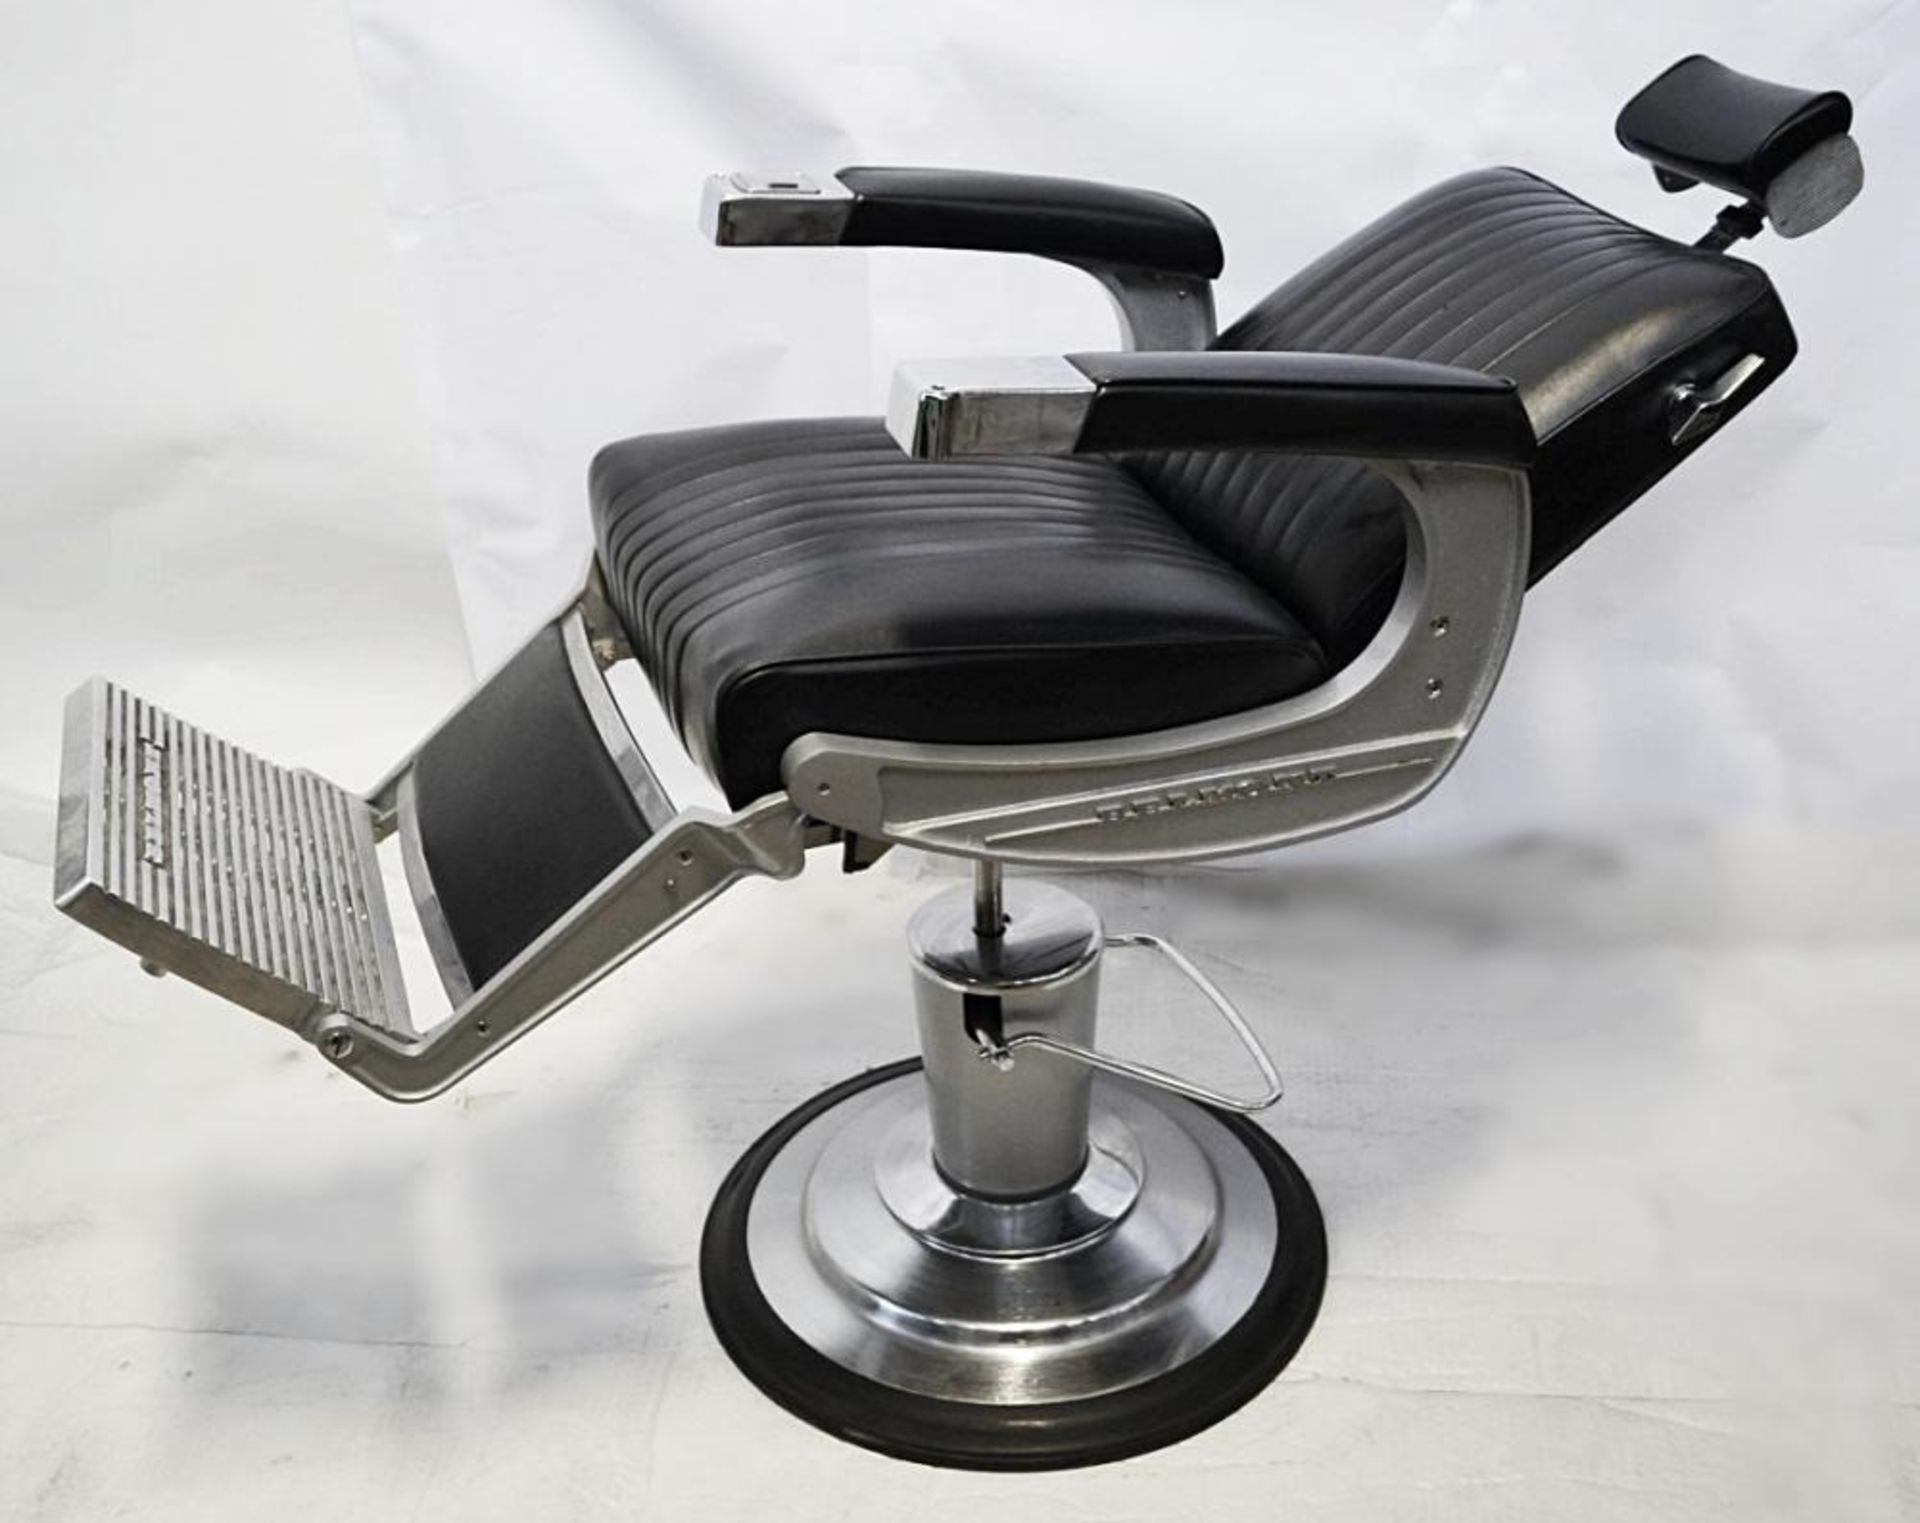 1 x Takara BELMONT "Apollo 2" Barbers Chair - Recently Taken From A Premier West-End Male Grooming S - Image 3 of 19